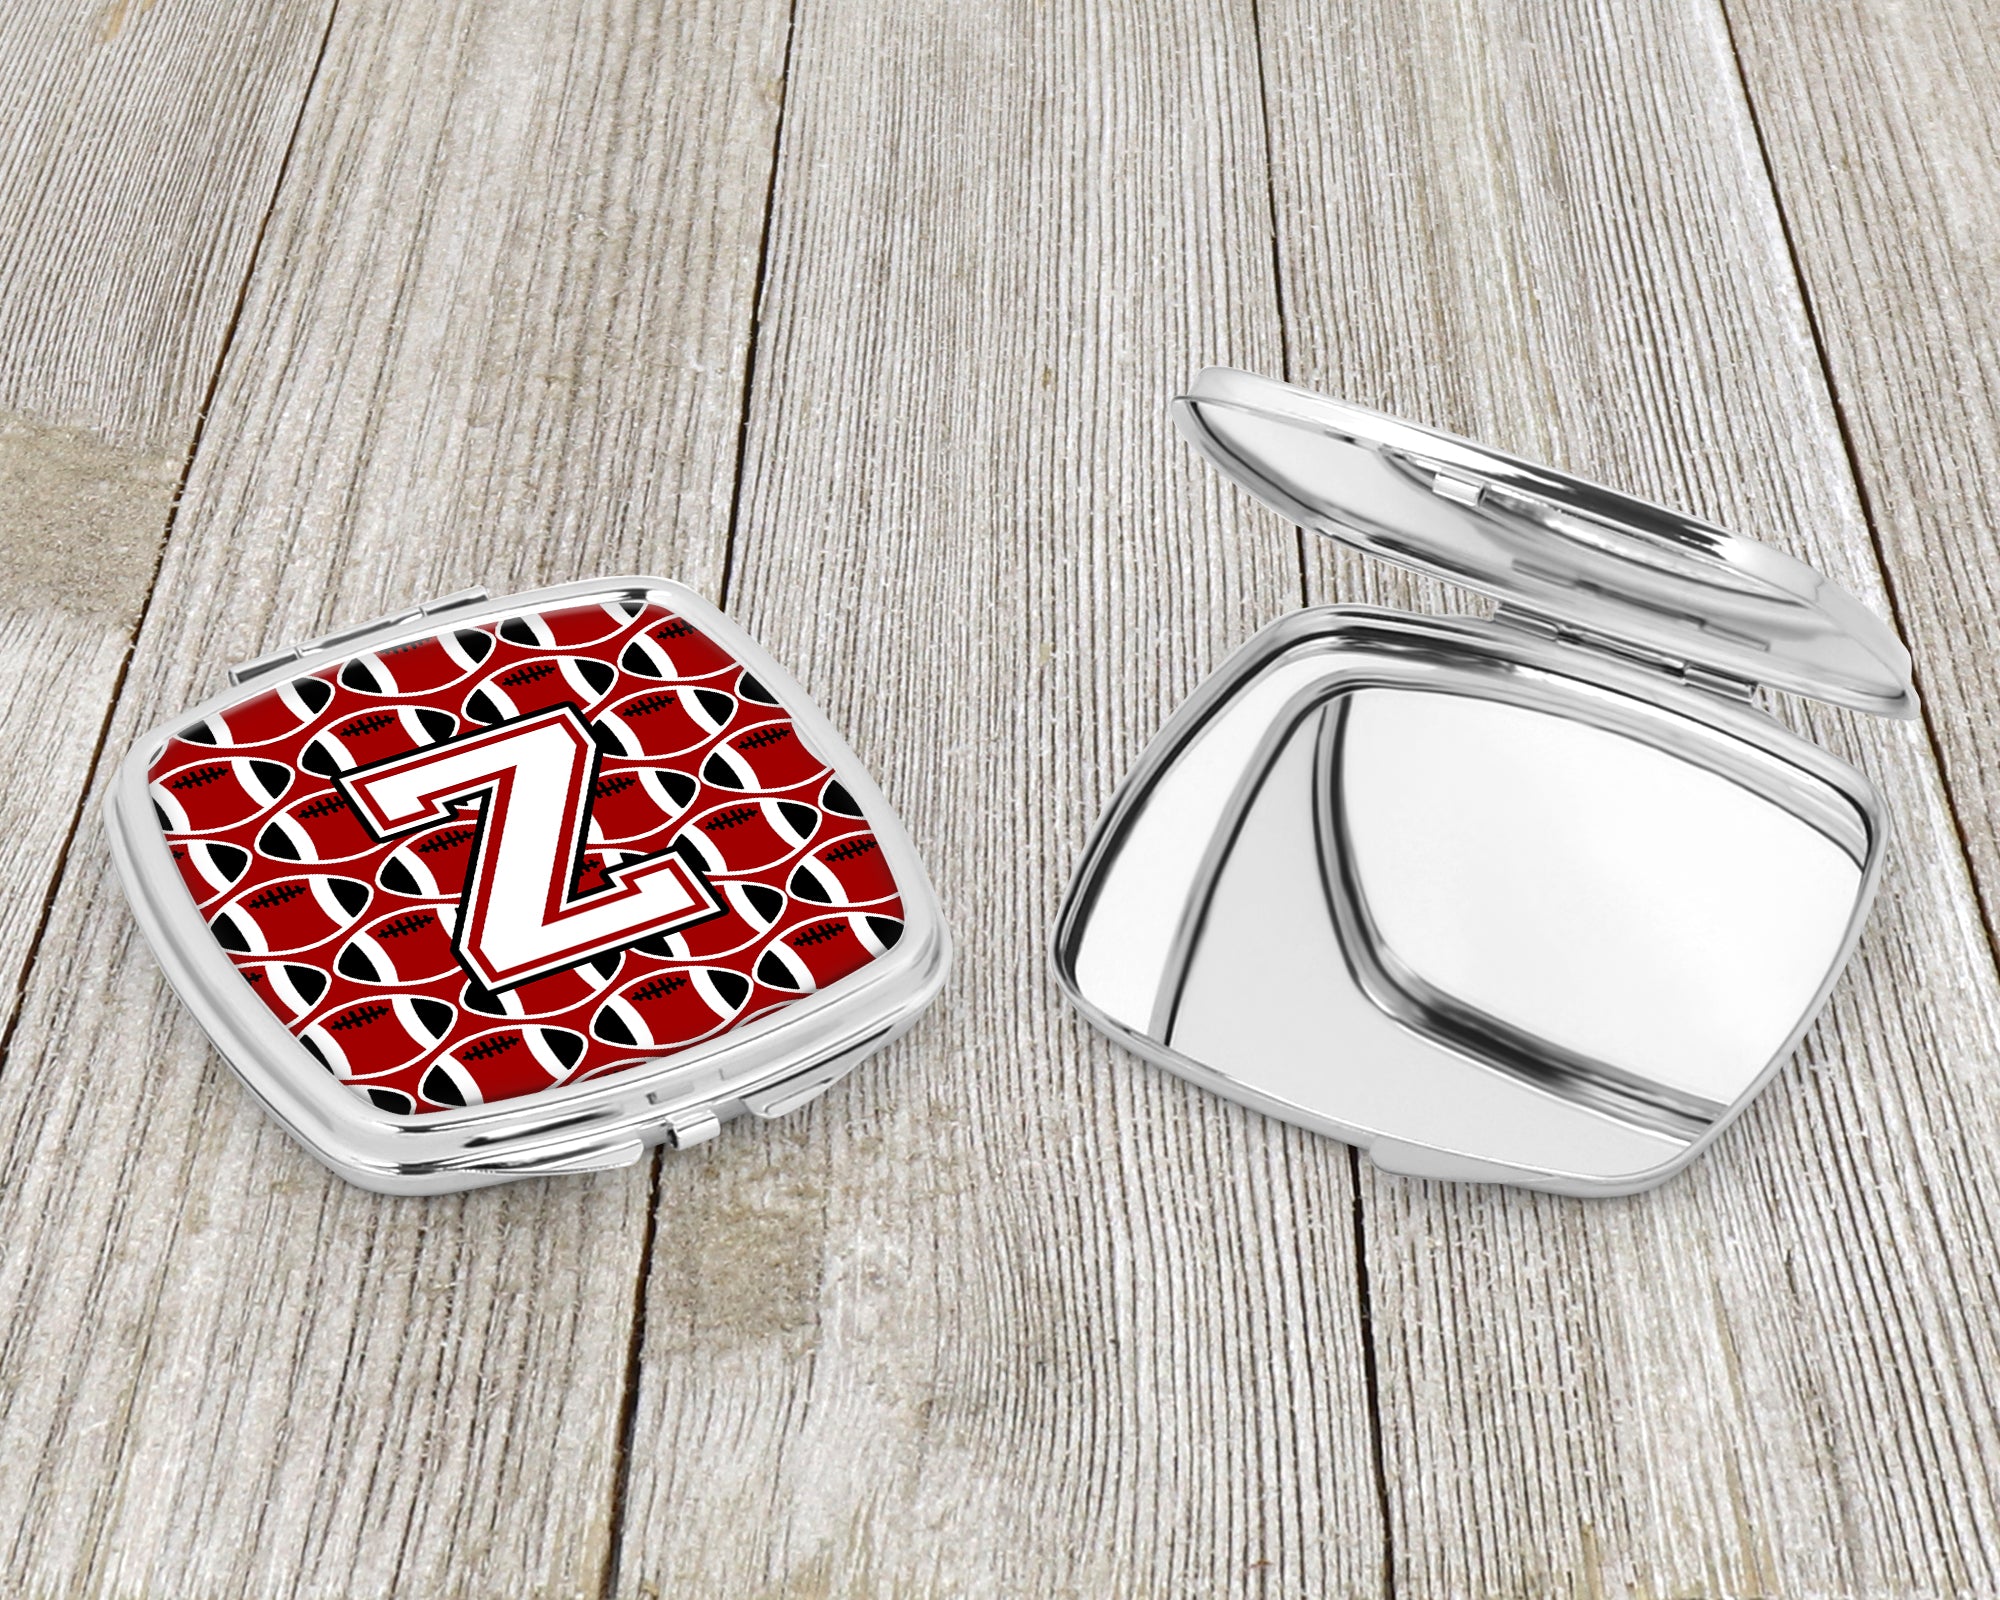 Letter Z Football Cardinal and White Compact Mirror CJ1082-ZSCM